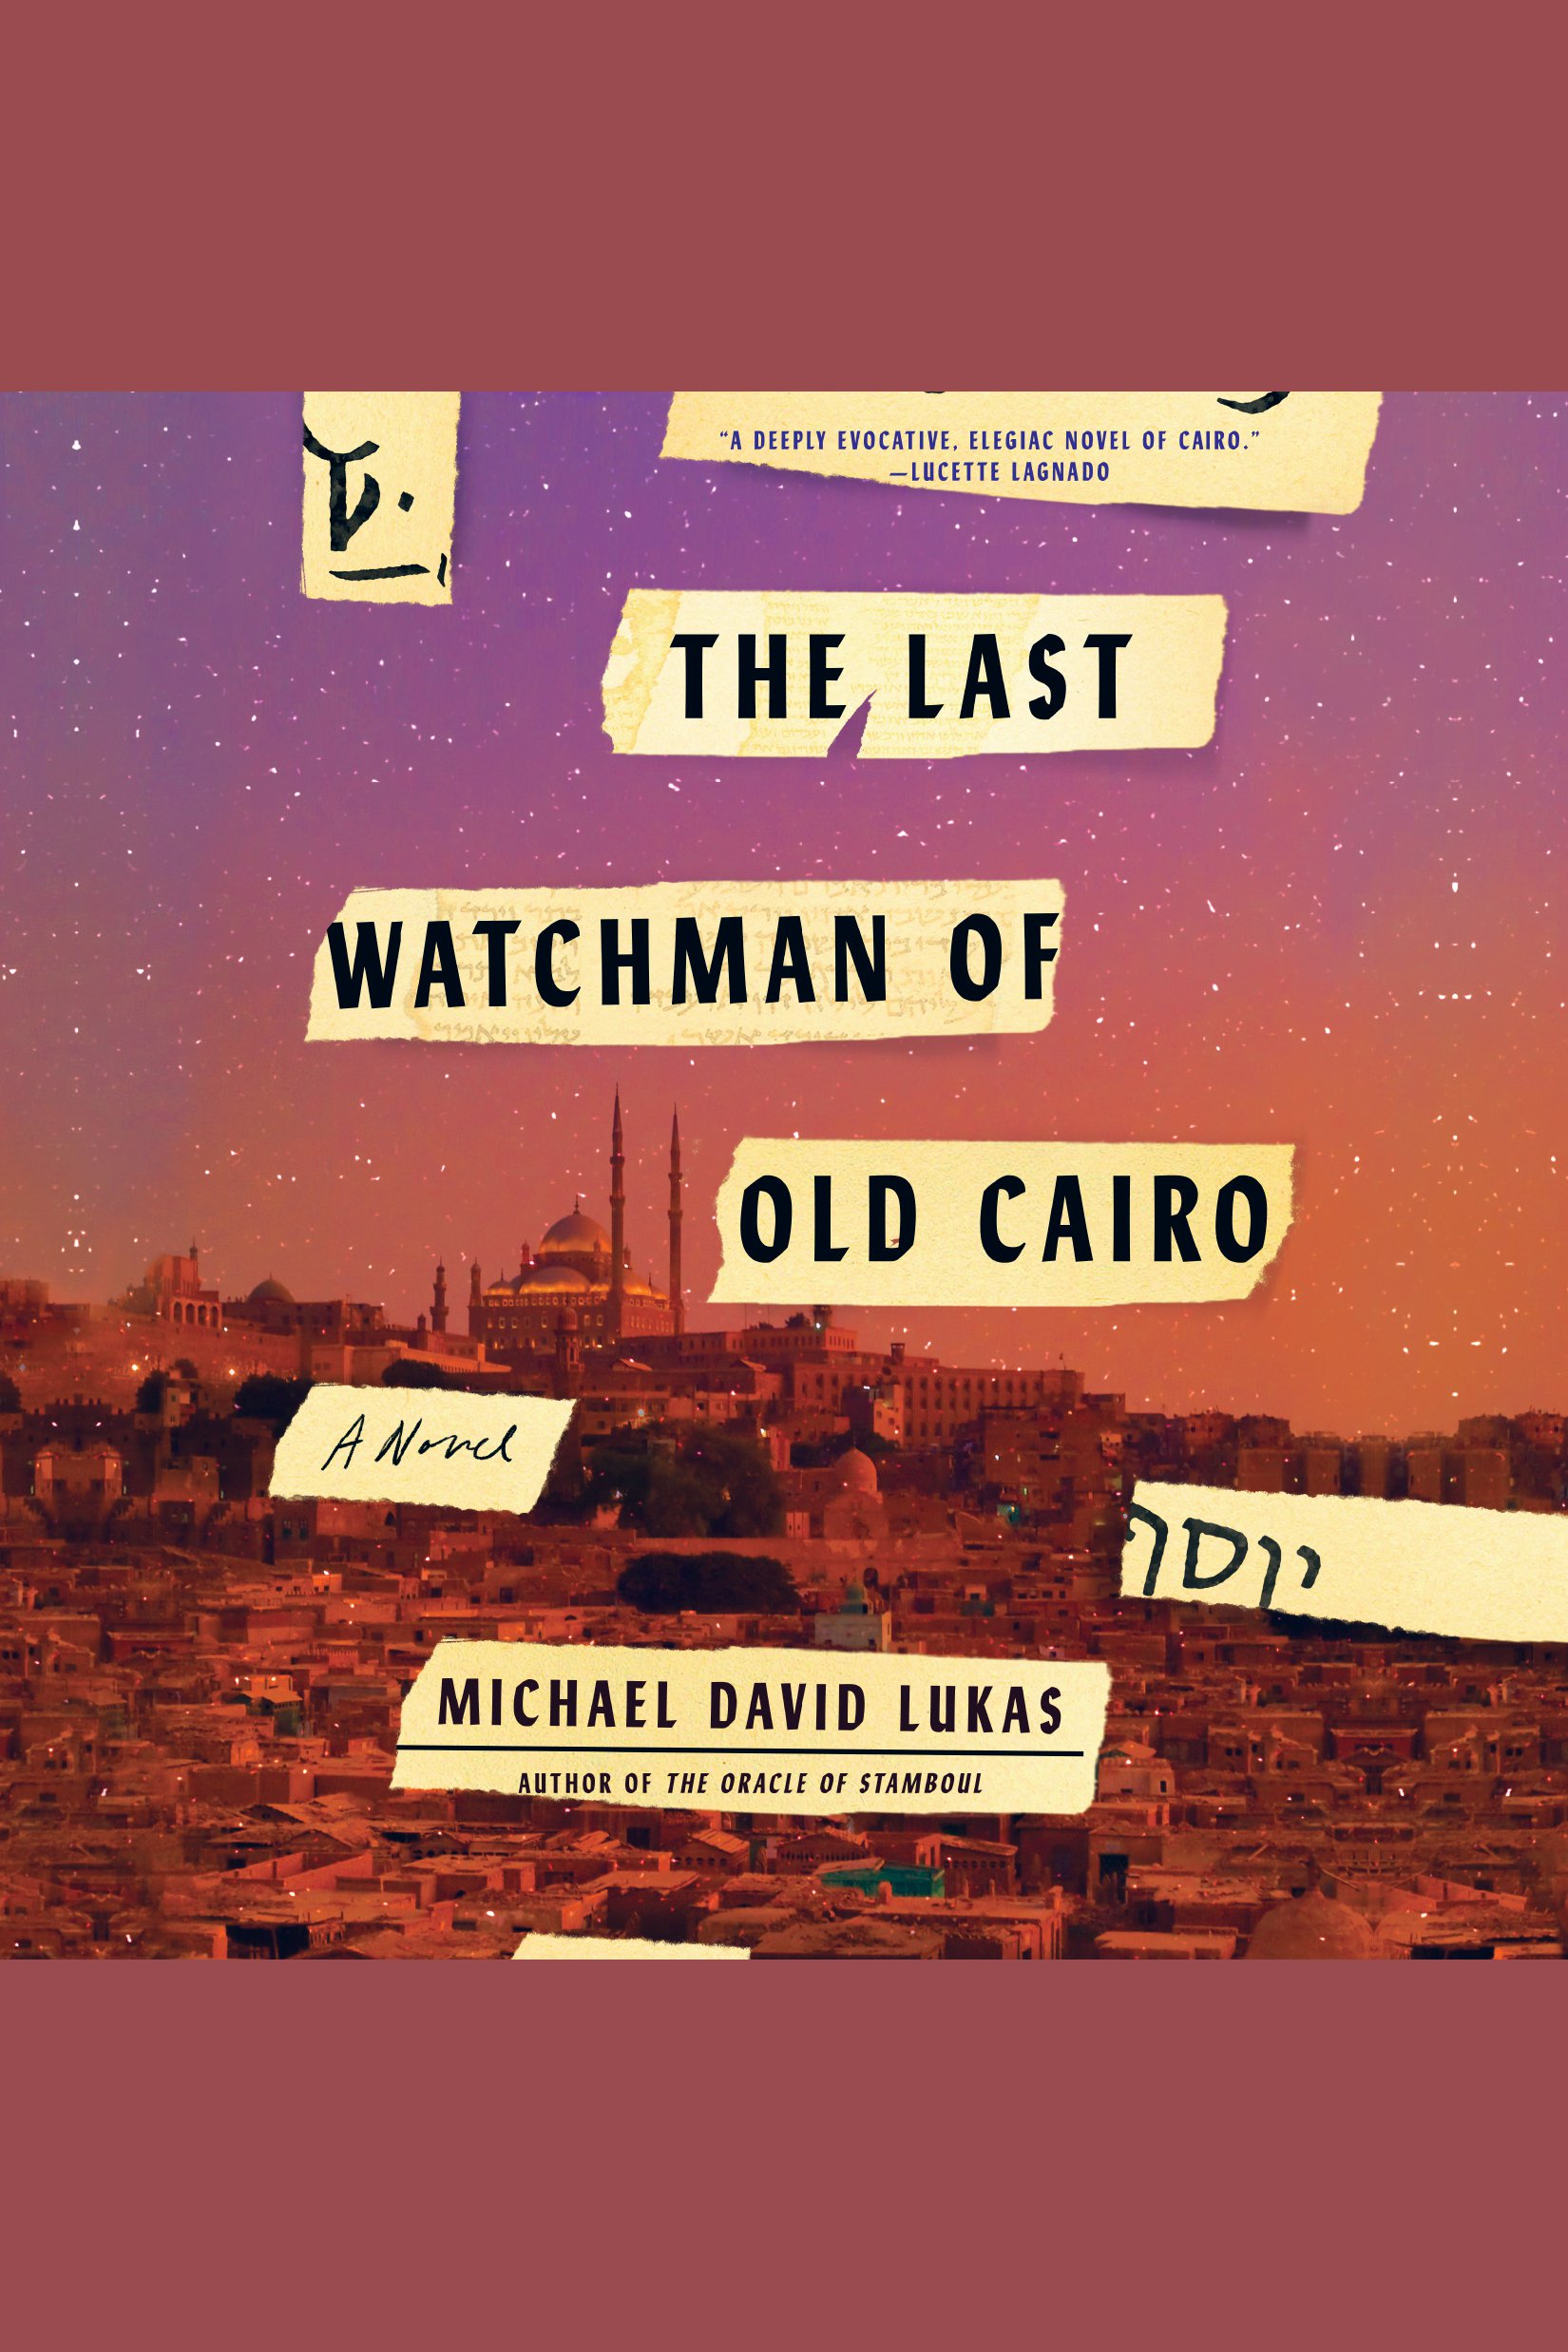 The last watchman of Old Cairo cover image